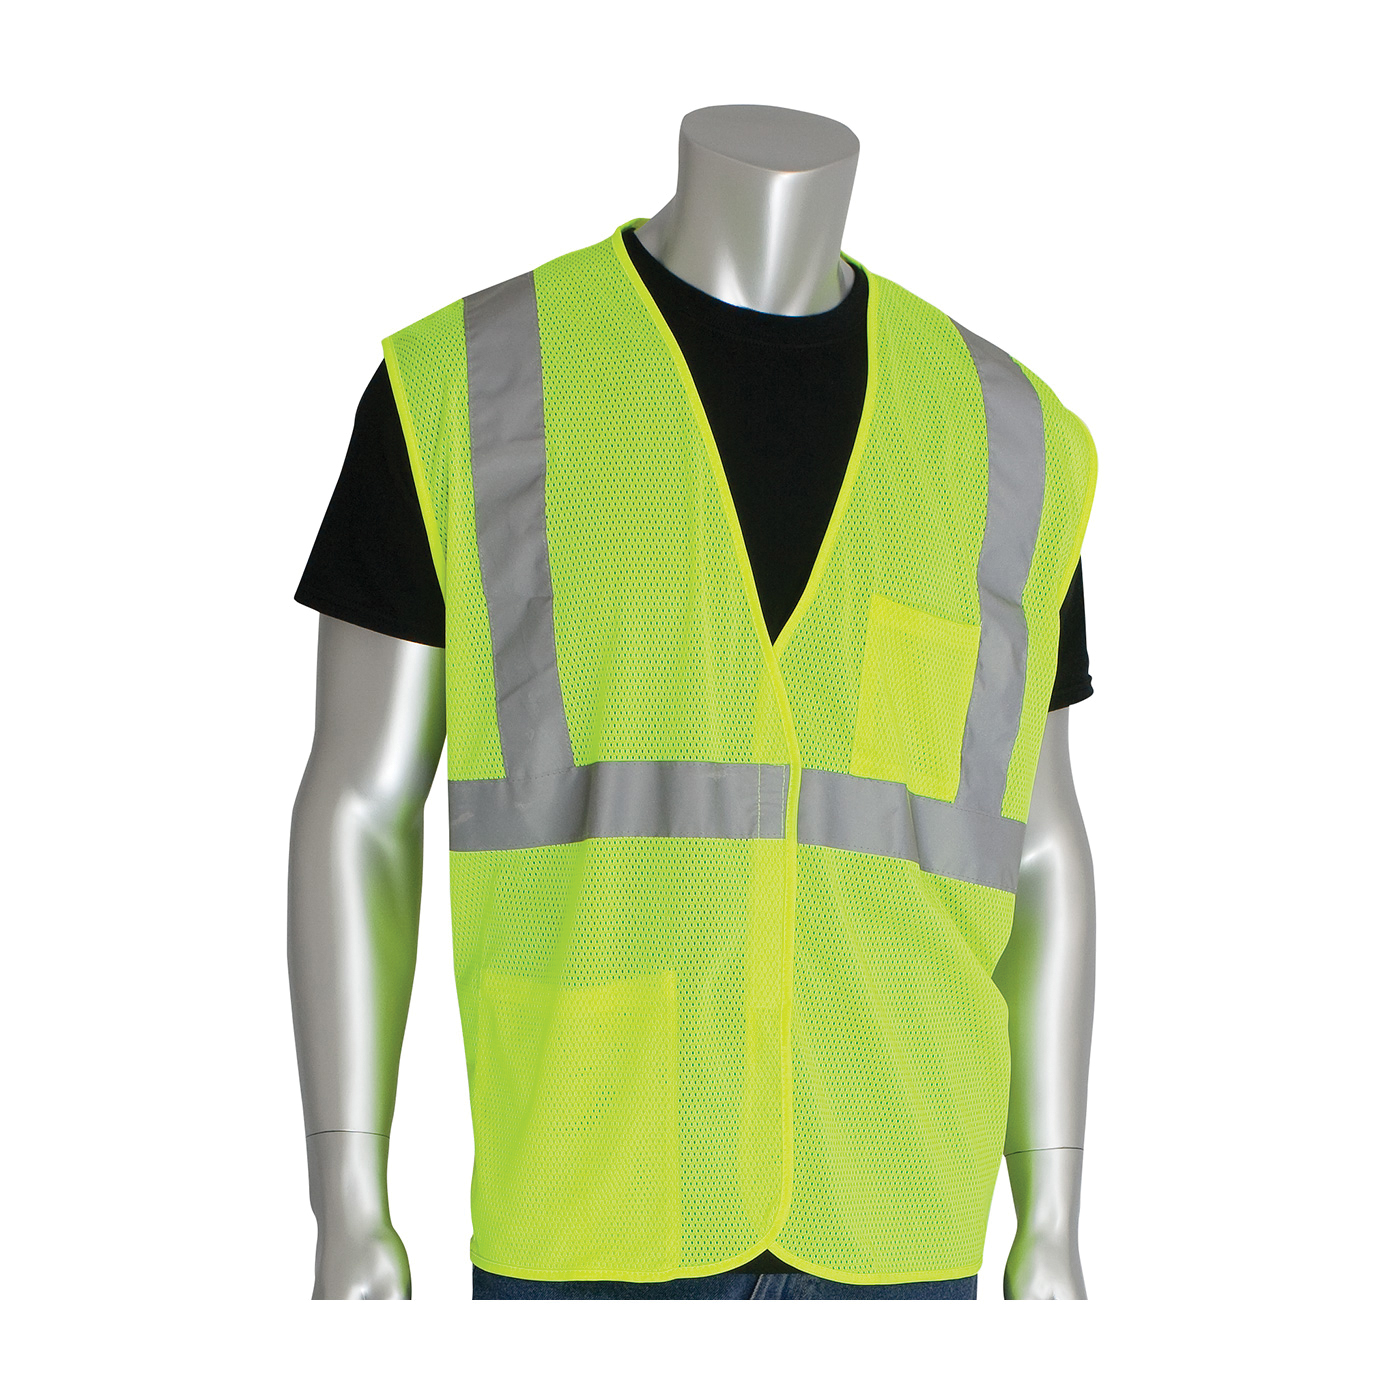 PIP® 302-0702-LY/XL Safety Vest, XL, Hi-Viz Lime Yellow, Polyester Mesh, Hook and Loop Closure, 2 Pockets, ANSI Class: Class 2, Specifications Met: ANSI 107 Type R